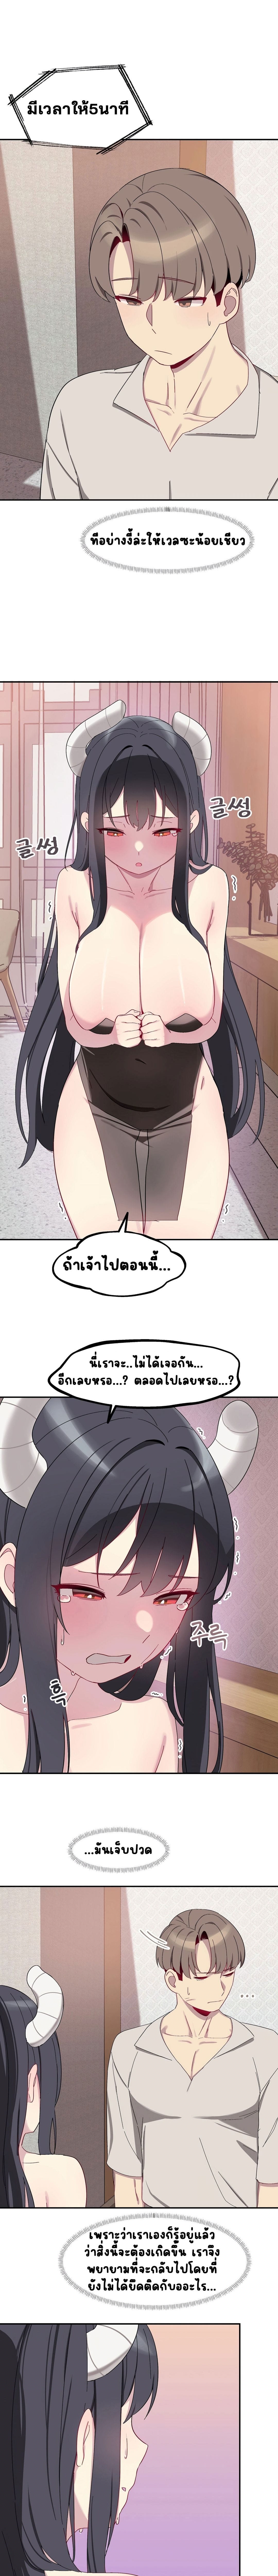 Hospitalized Life in Another World ตอนที่ 5 ภาพ 14